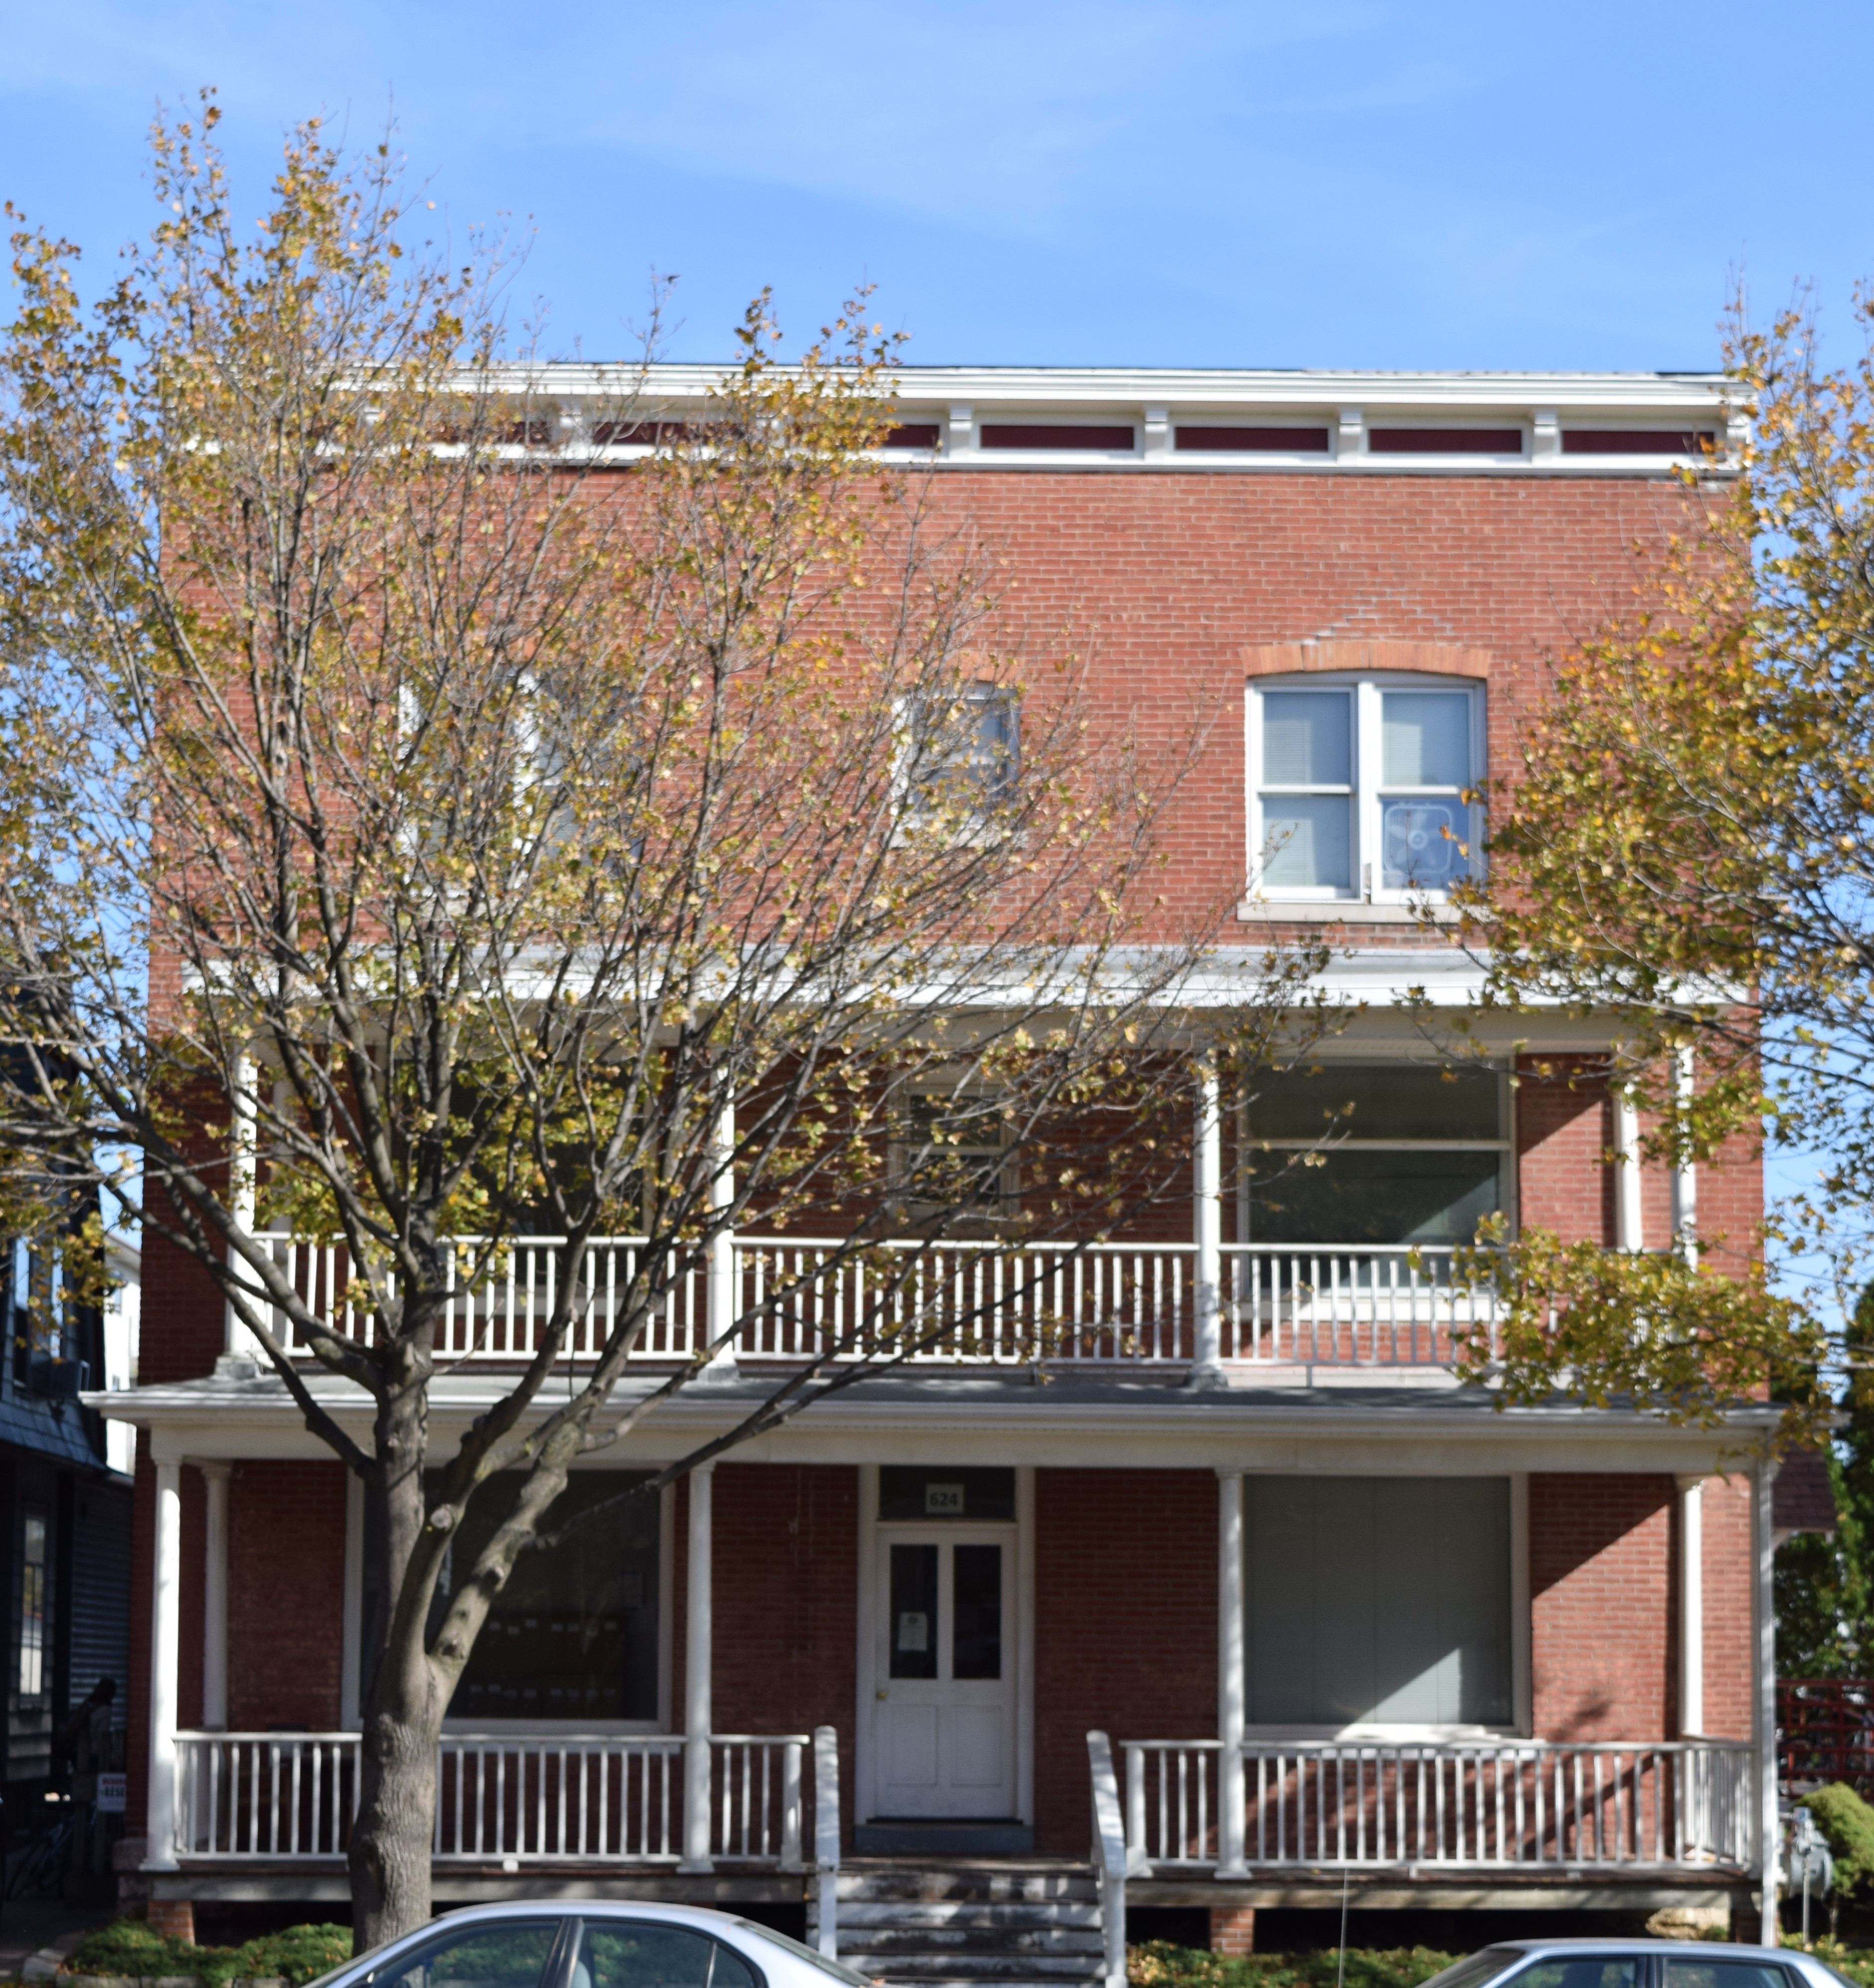 624 S. Clinton St. #1 – 3 Bedroom MAY or AUGUST 2022